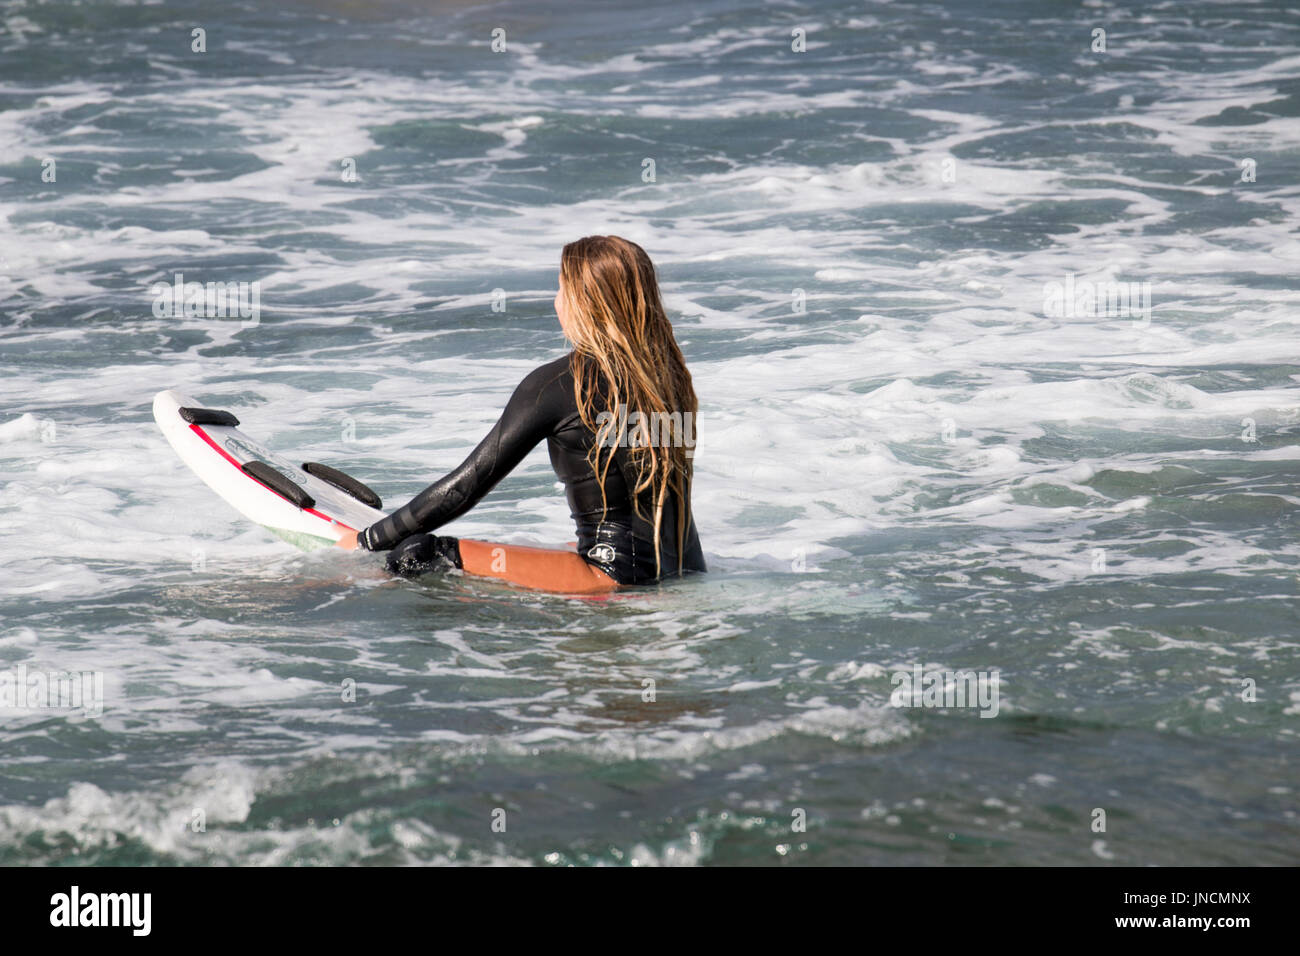 Muligt Mania Fighter Australian surfer girl in Sydney at the beach with surfboard surfing in the  ocean,Sydney,Australia Stock Photo - Alamy